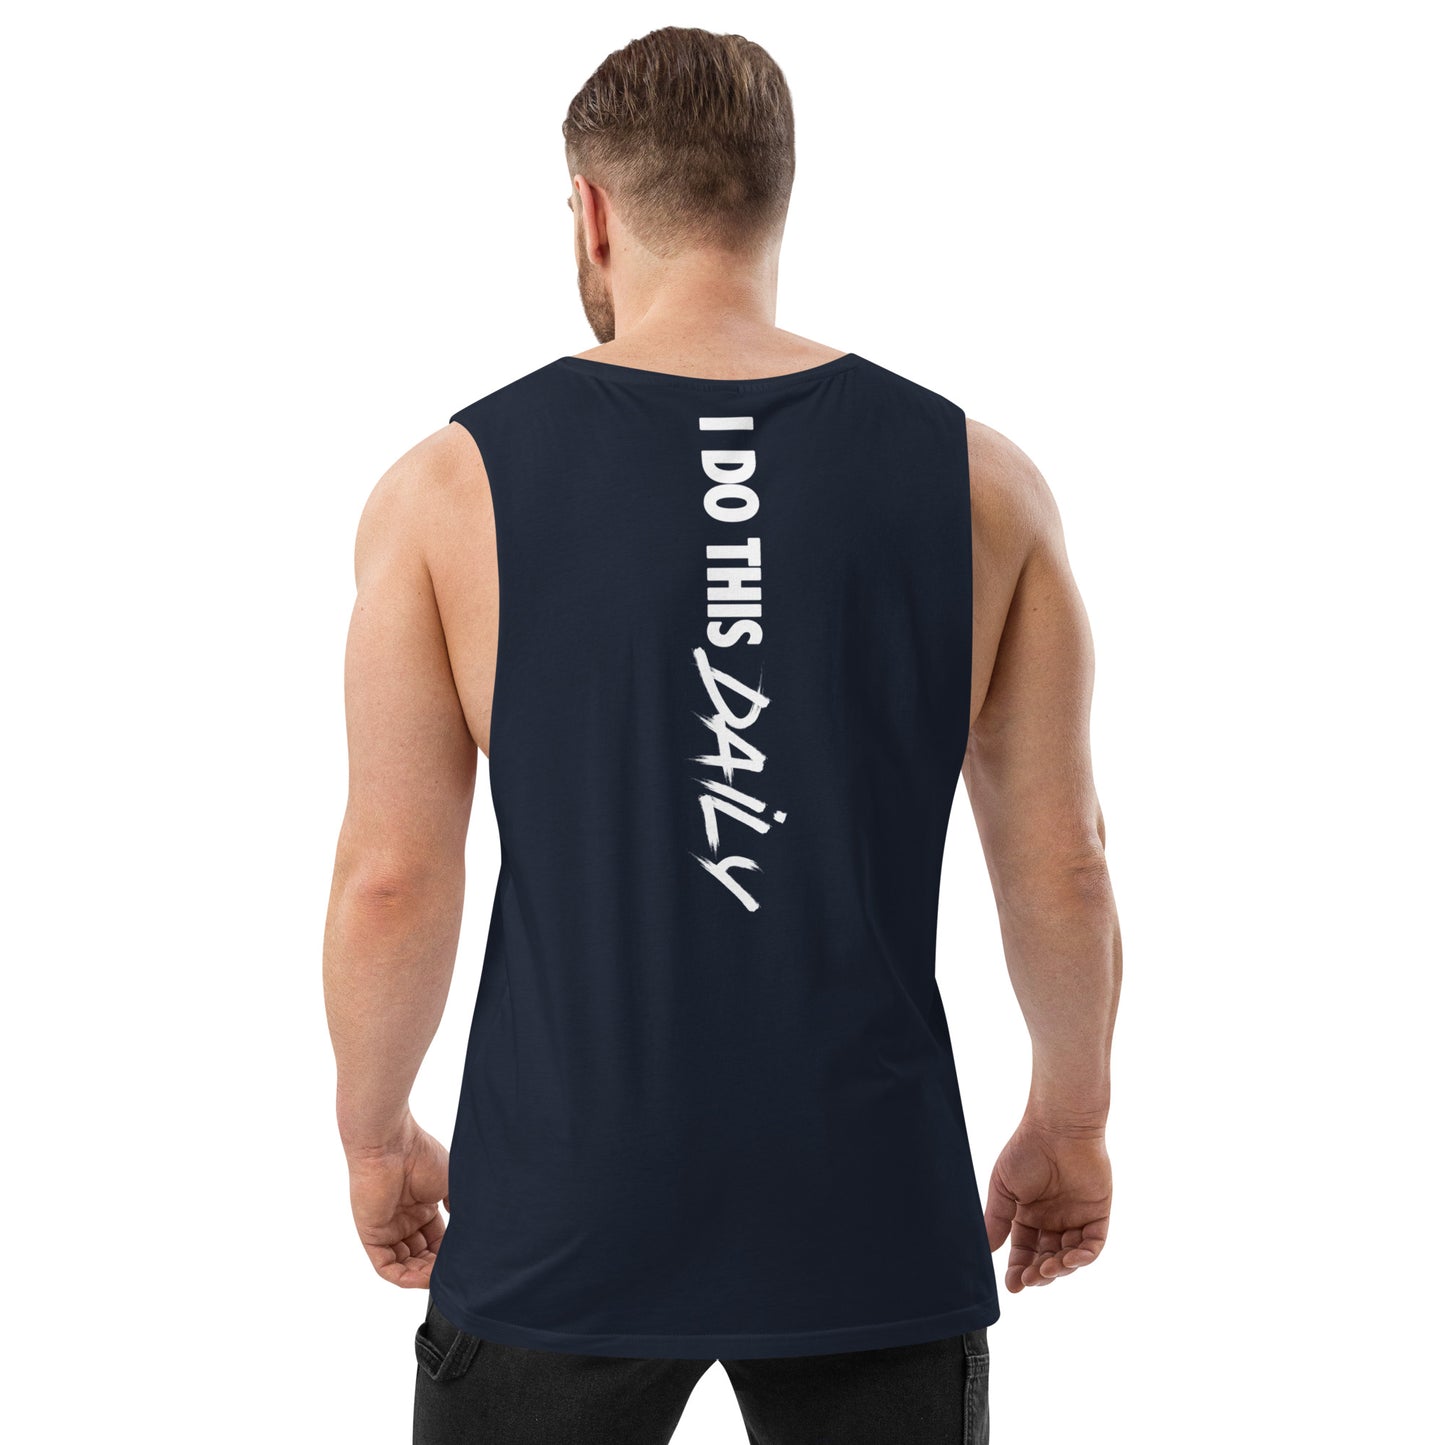 DLY - Fitness Tank Top